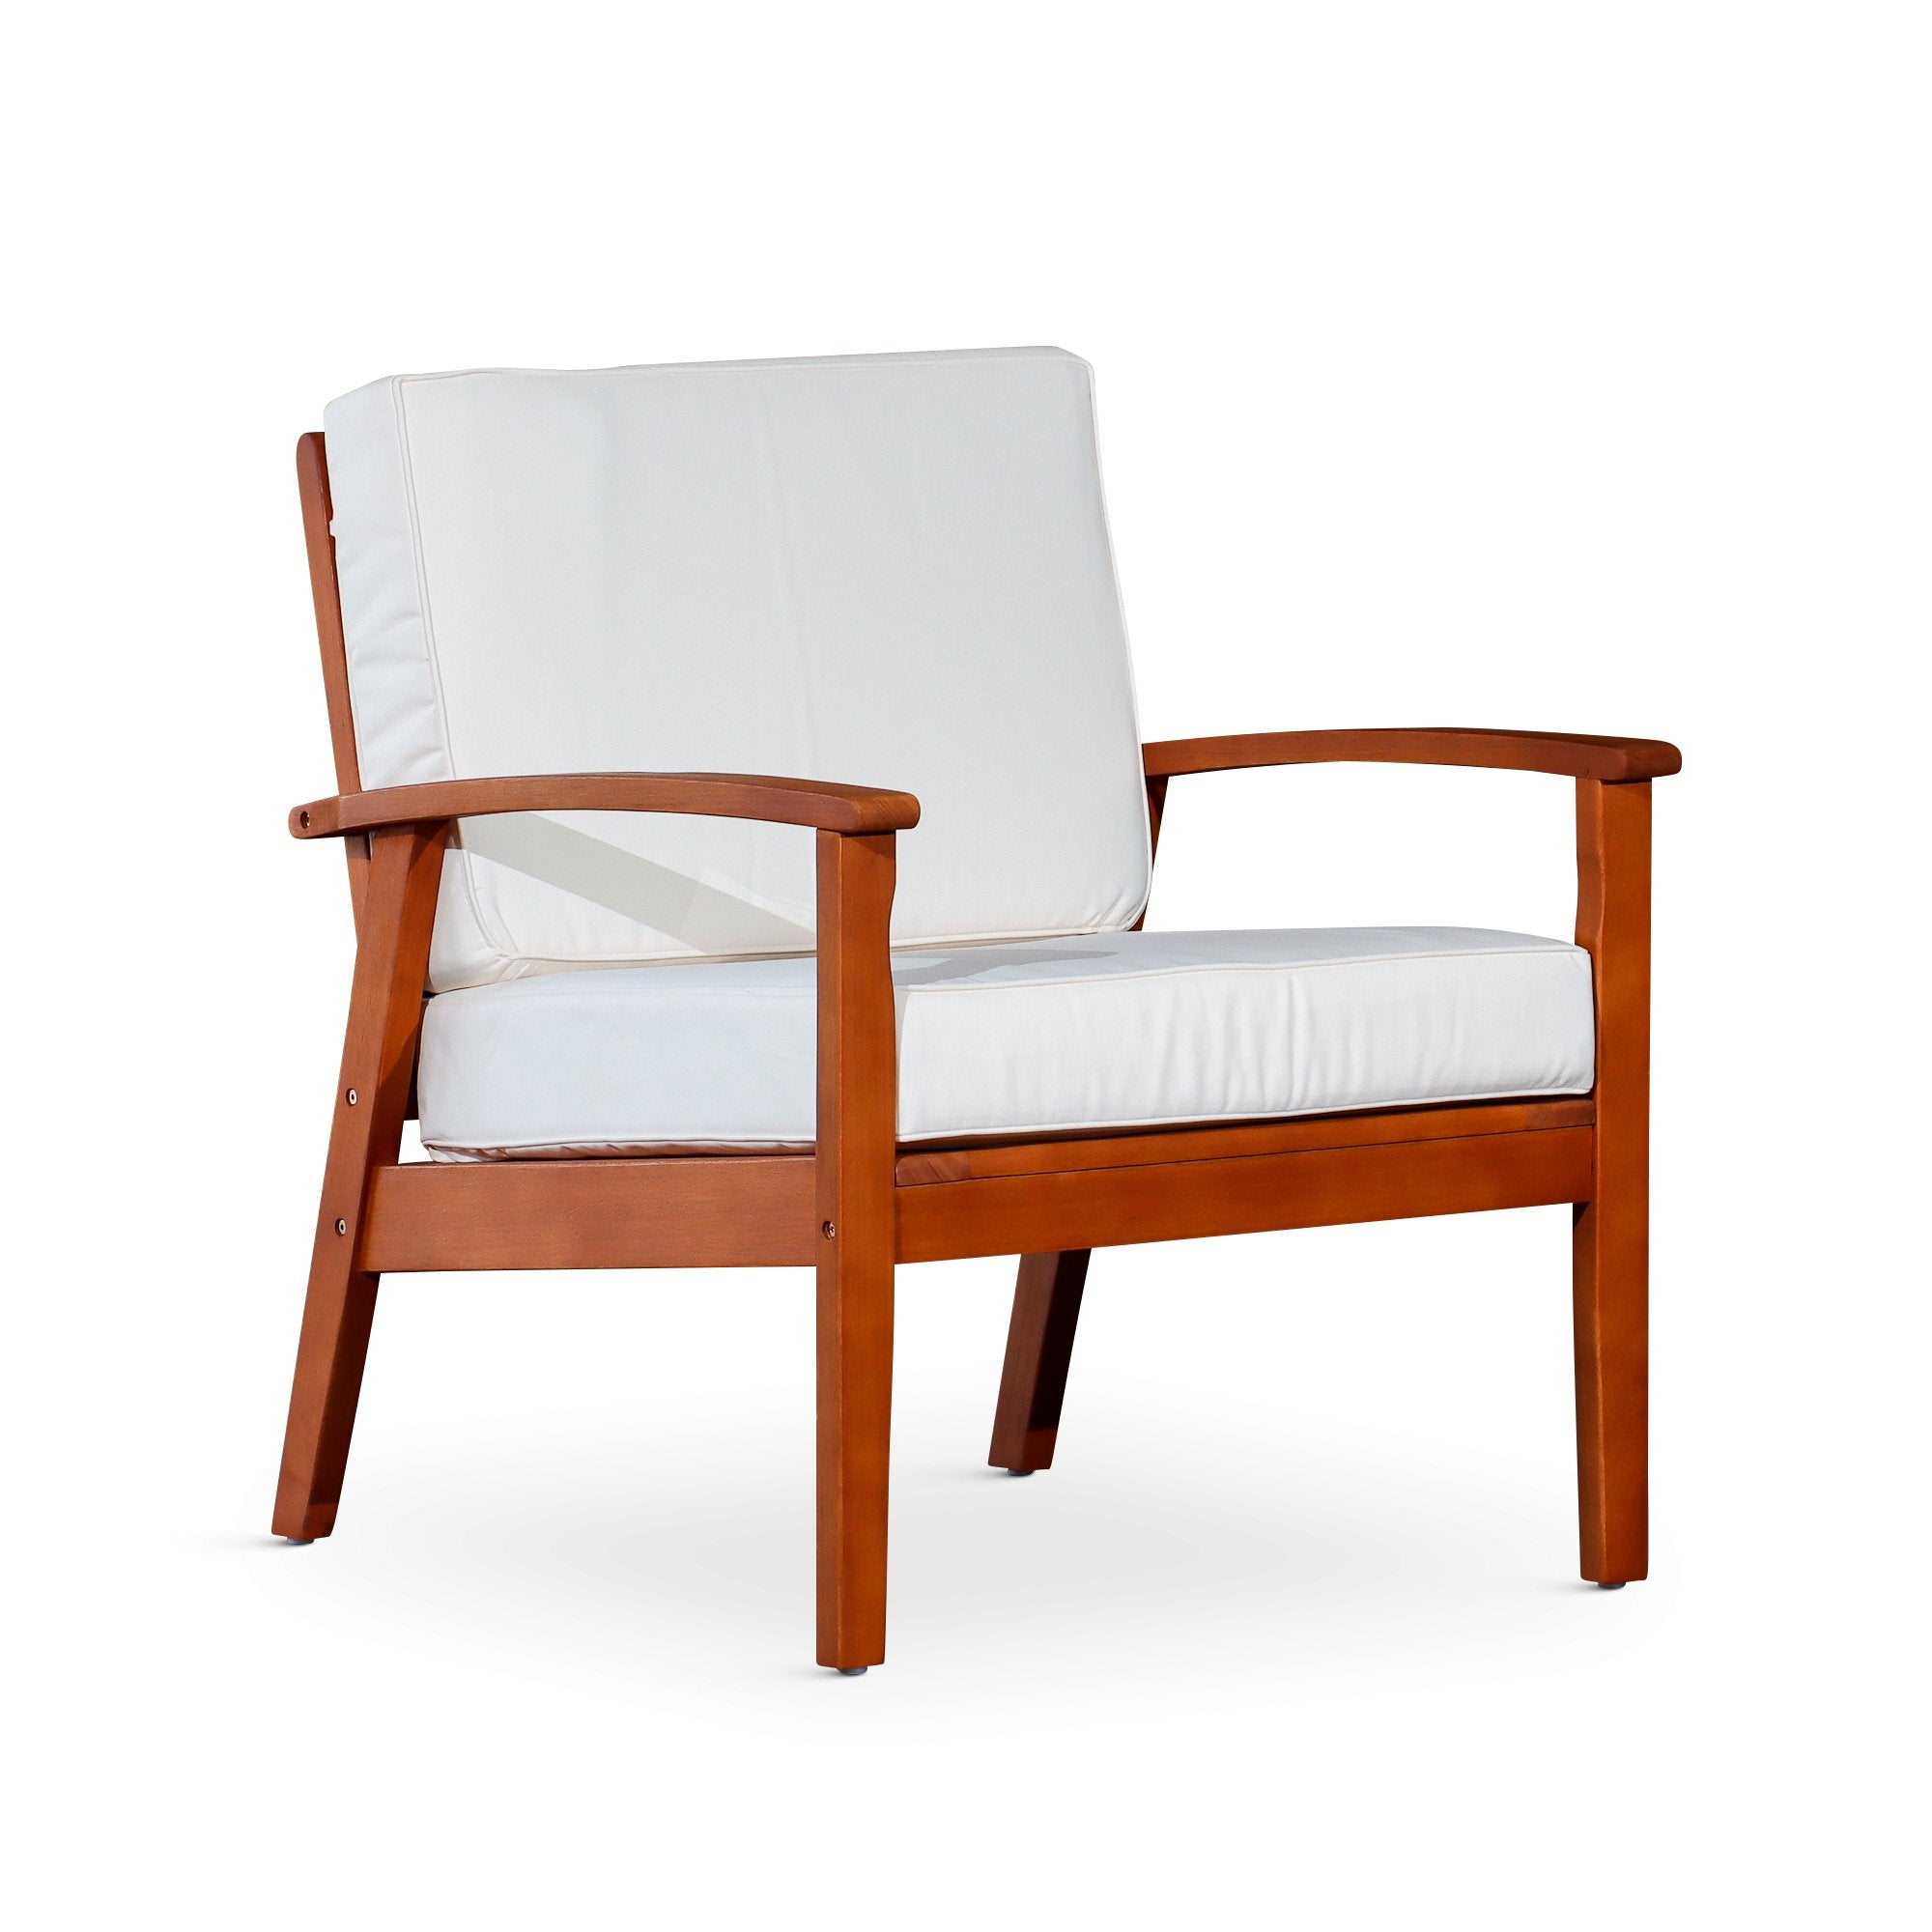 Deep Seat Outdoor Chair, Natural Oil Finish, Burgundy Cushions - Tuesday Morning-Chairs & Seating